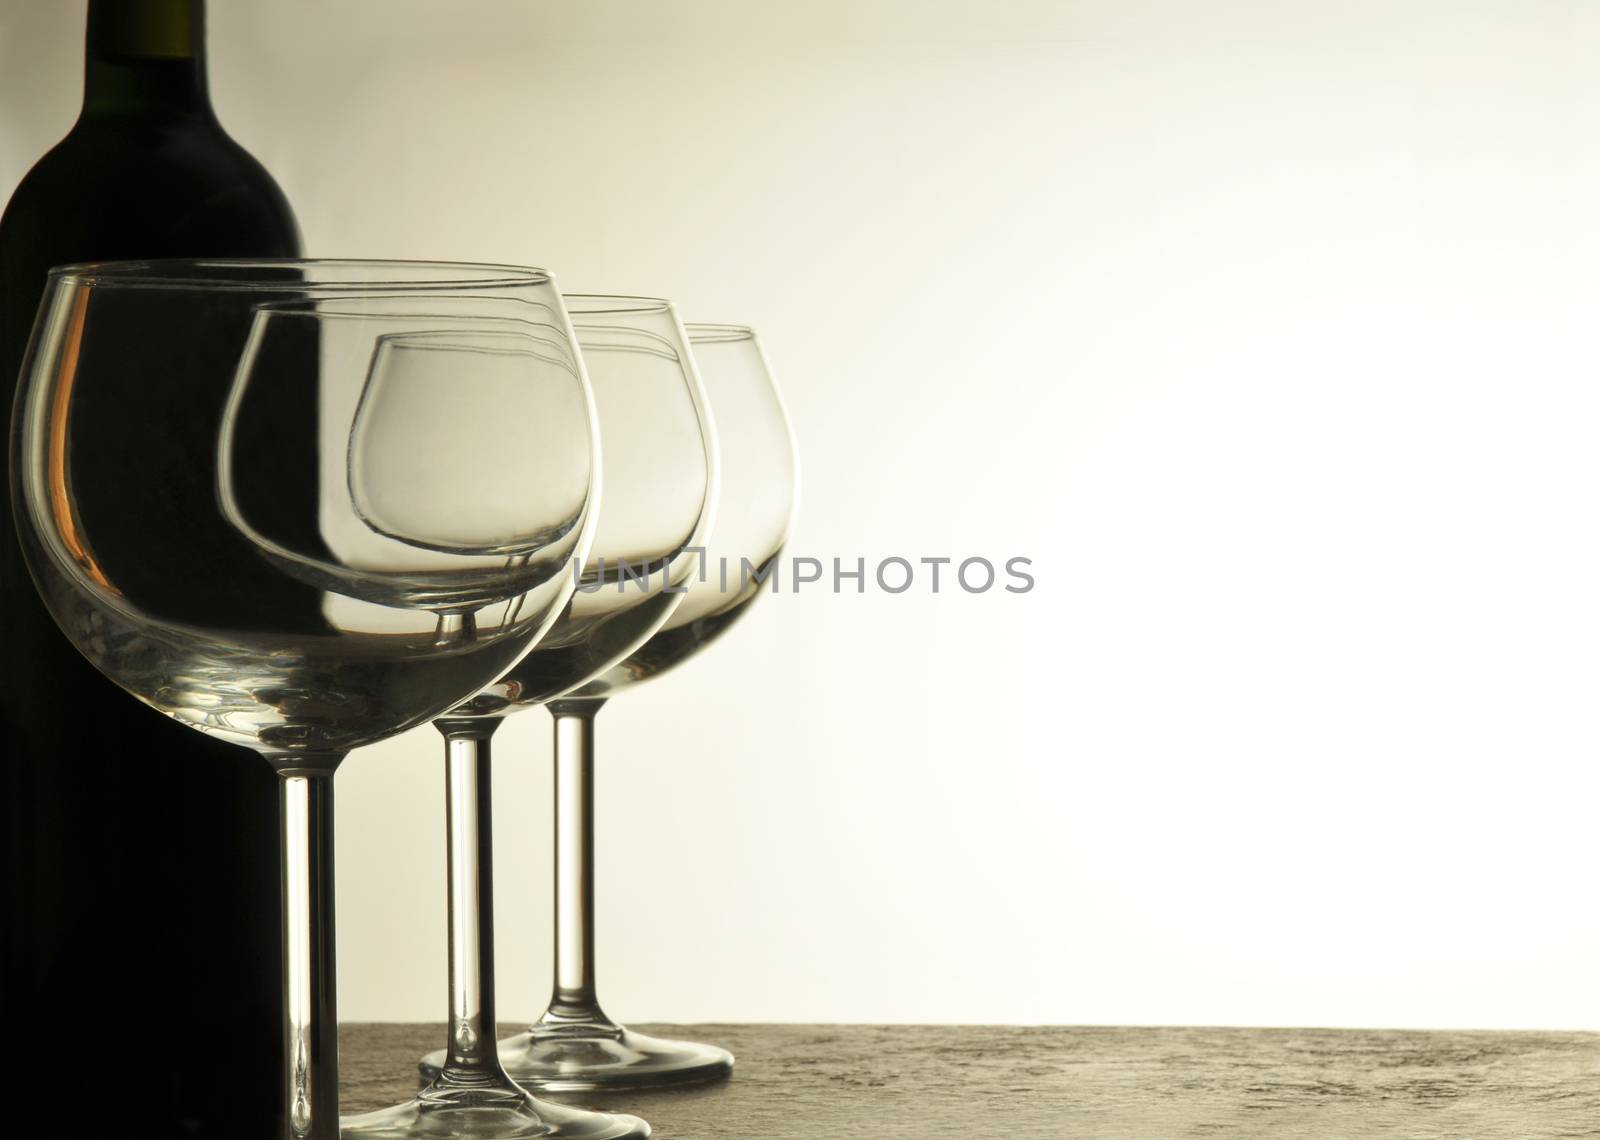 A row of Empty Wine Glasses with red wine bottle in silhouette behind horizontal format with warm light